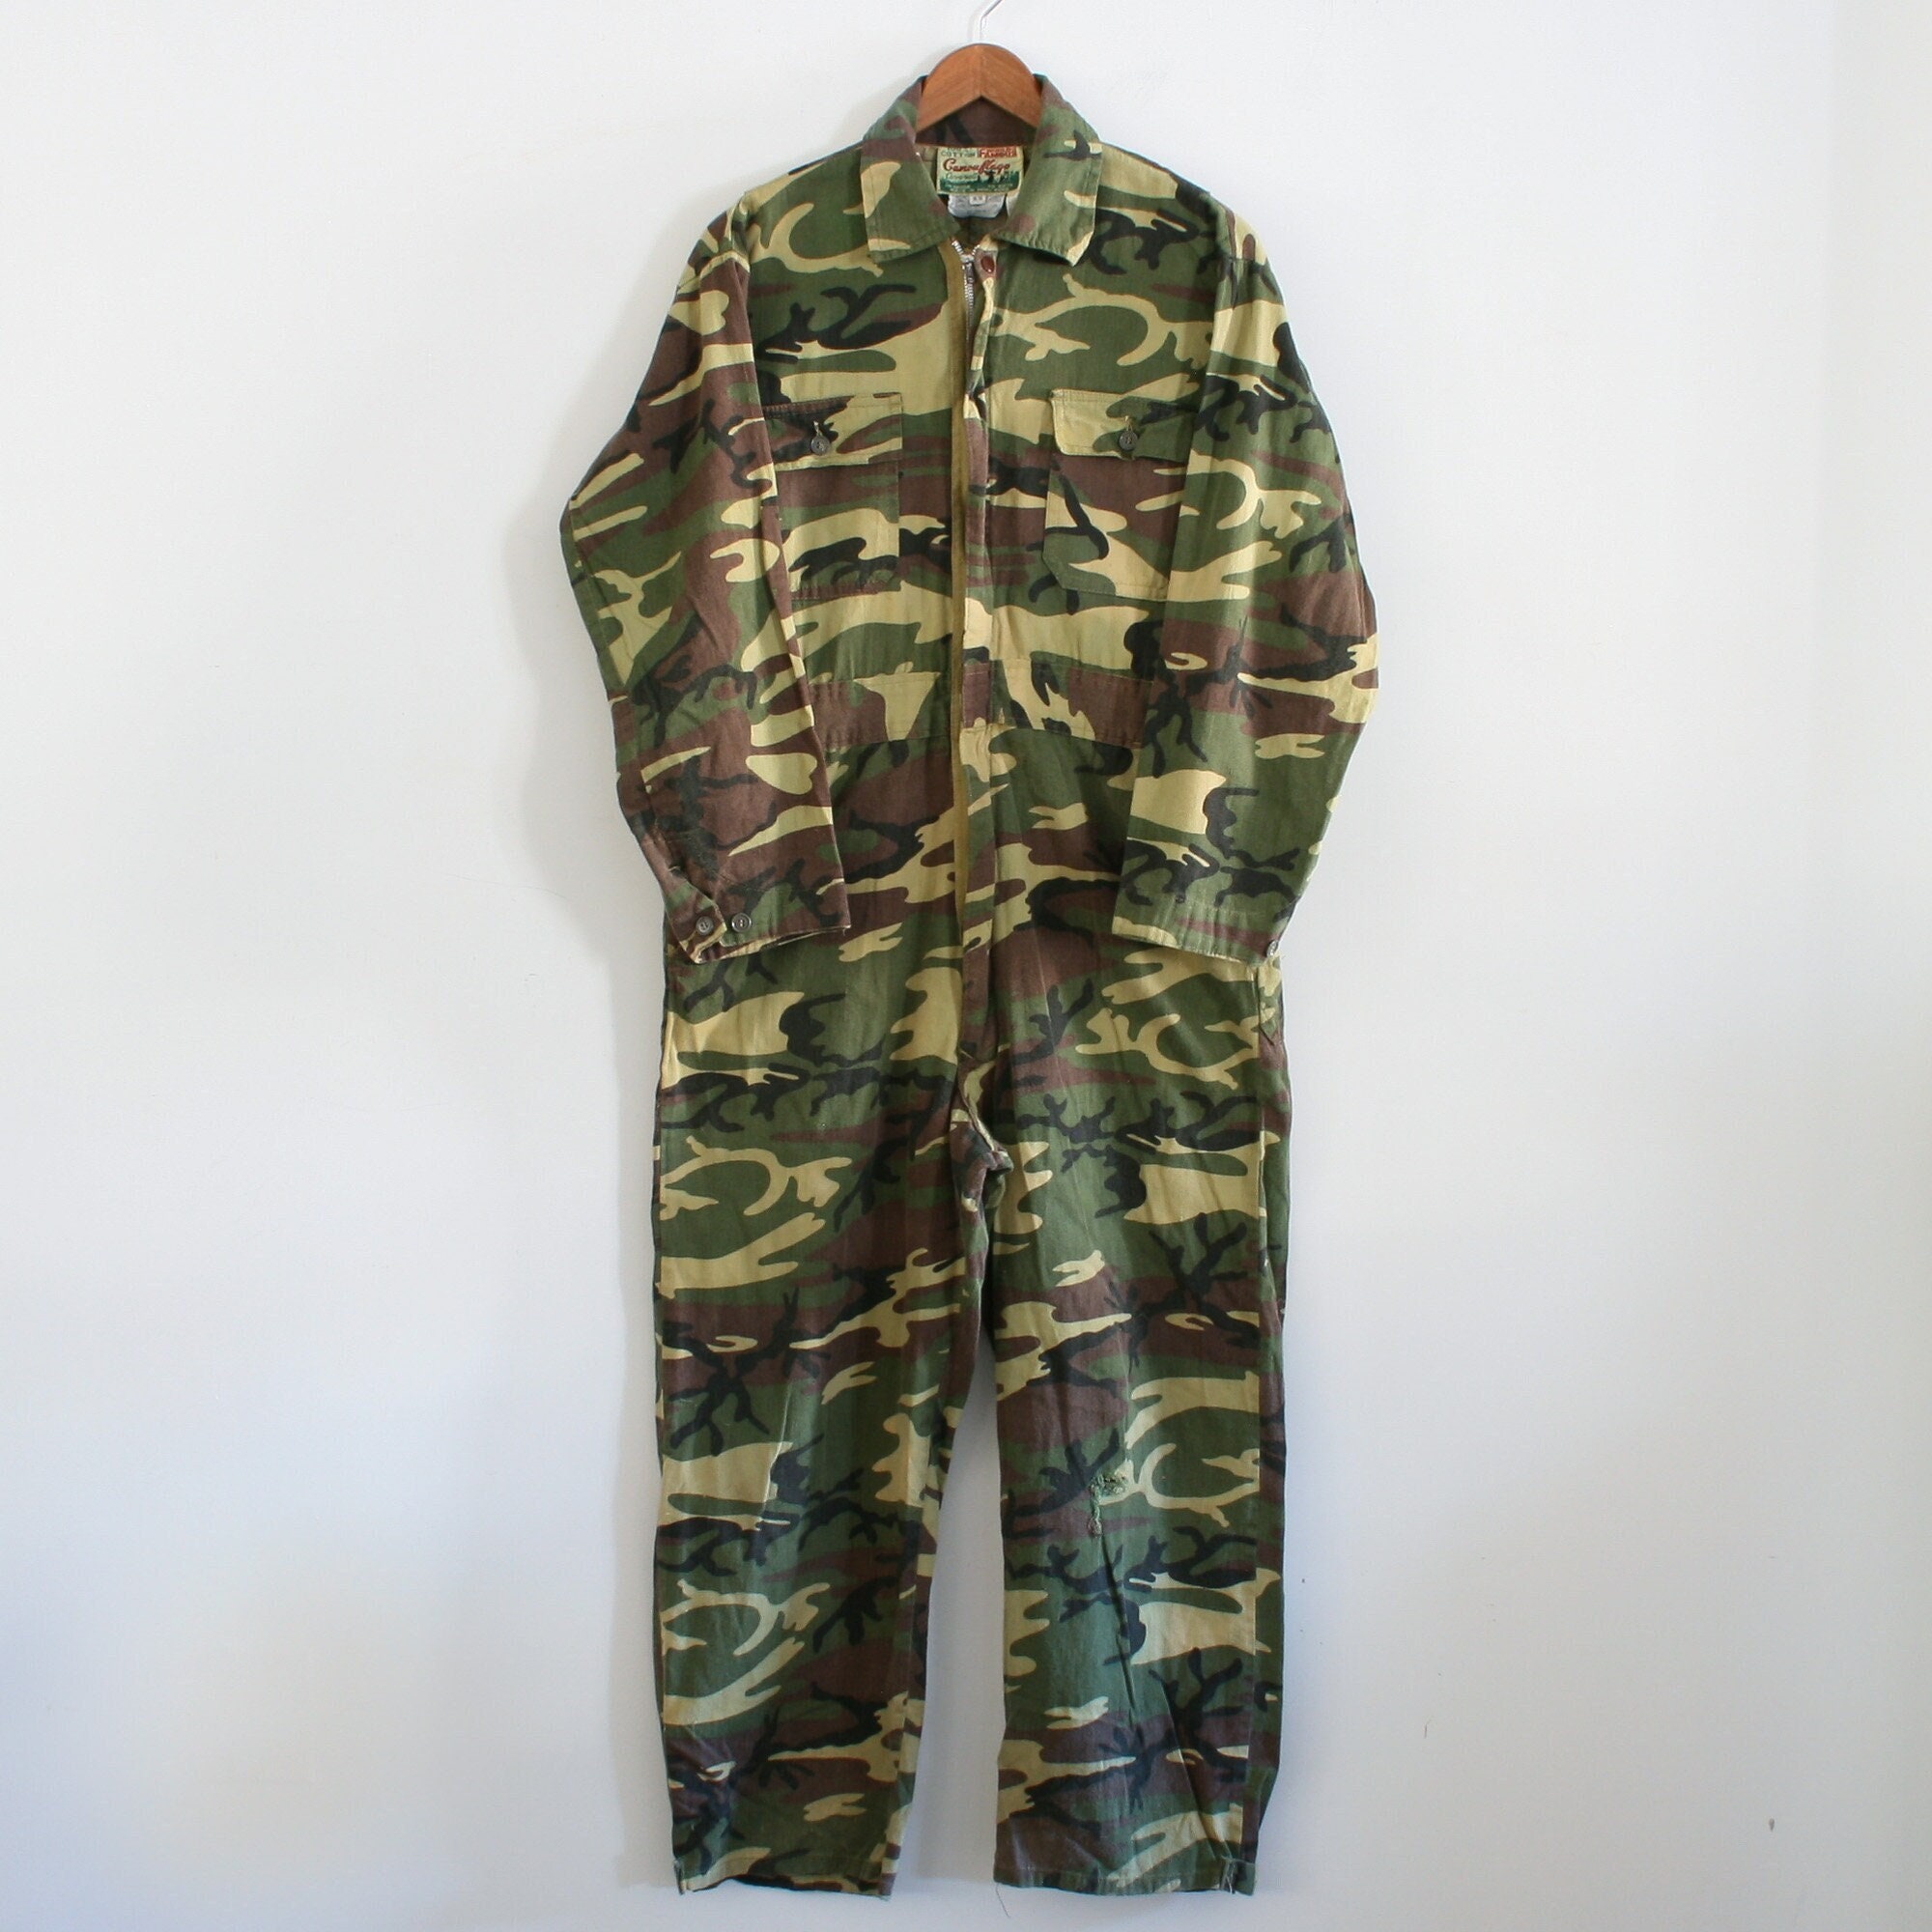 Vintage Rattlers Brand Coveralls Ducks Unlimited Camo Size XL